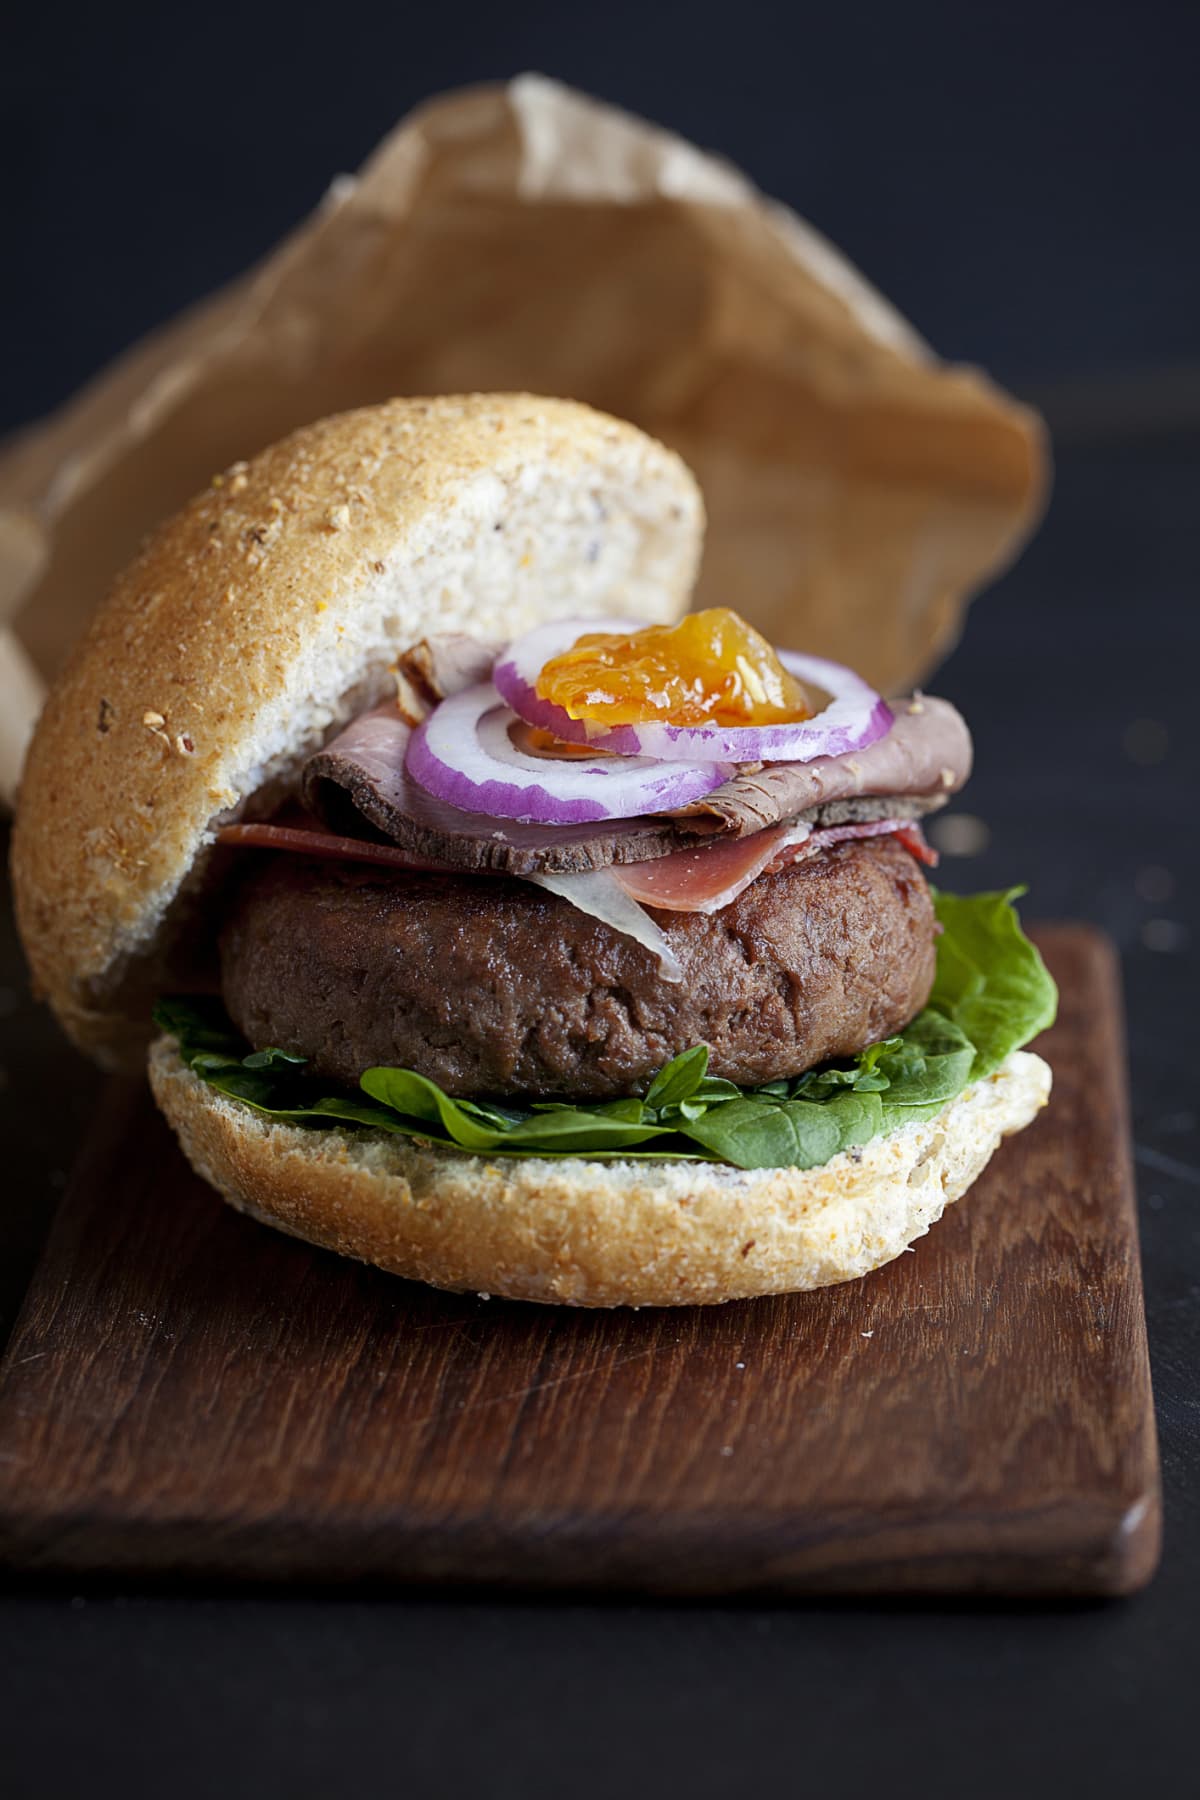 Burger with wagyu patty dressed with onion and lettuce and served on a bun